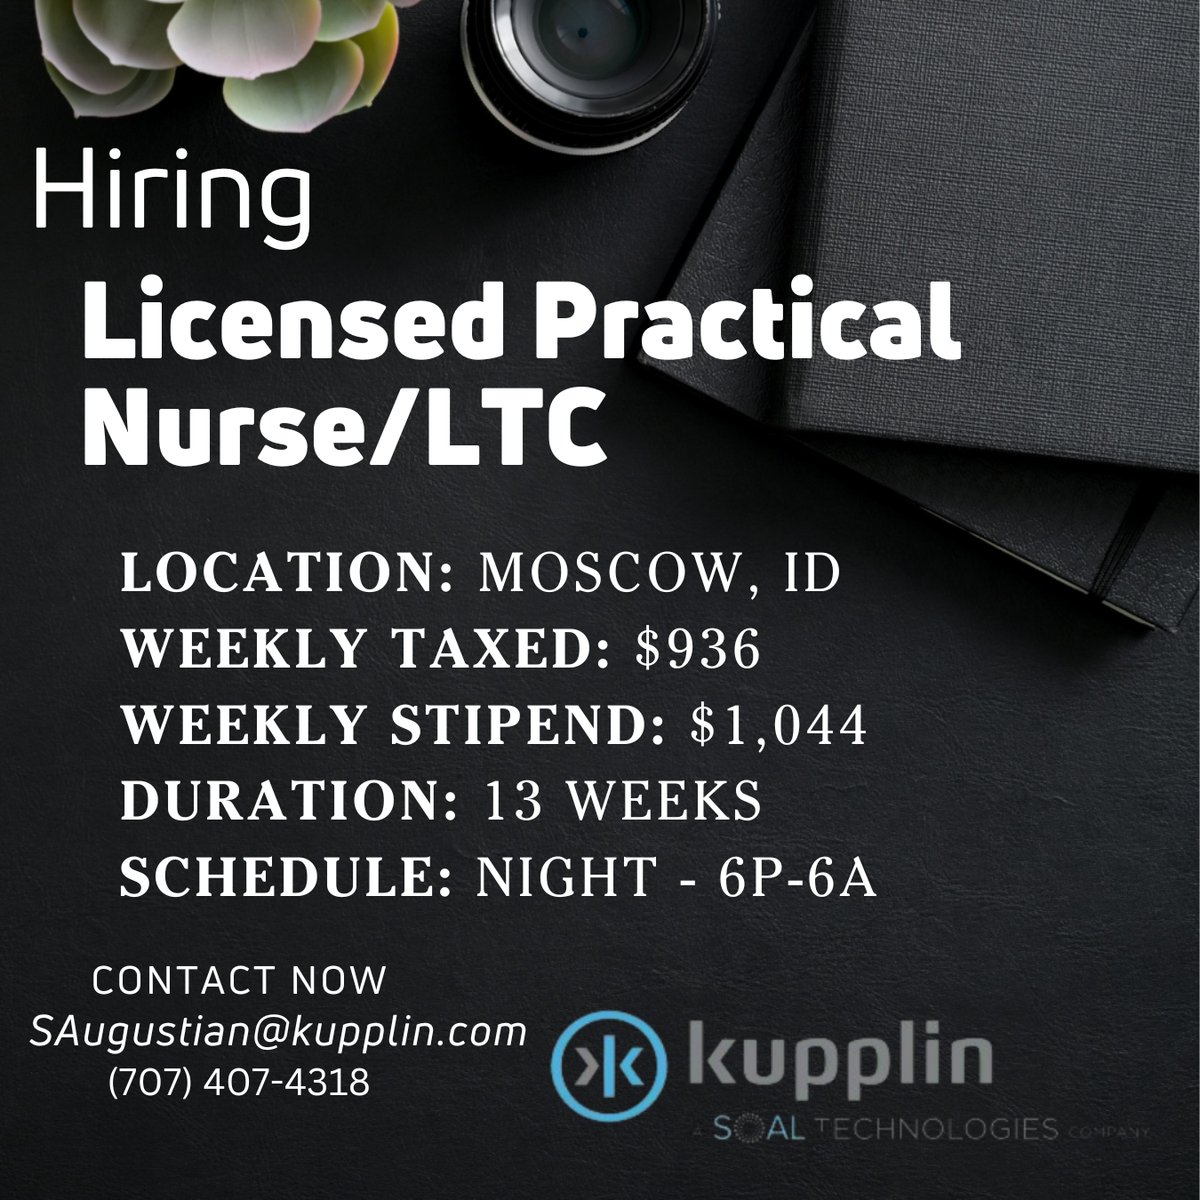 Embark on a rewarding journey as a Night Shift LTC LPN in beautiful Moscow, ID. Immediate start, competitive pay, and invaluable experience await.
Apply today 
SAugustian@kupplin.com - (707) 407-4318

#LPNJobs #NightShift #HealthcareCareers #MoscowID #LongTermCare